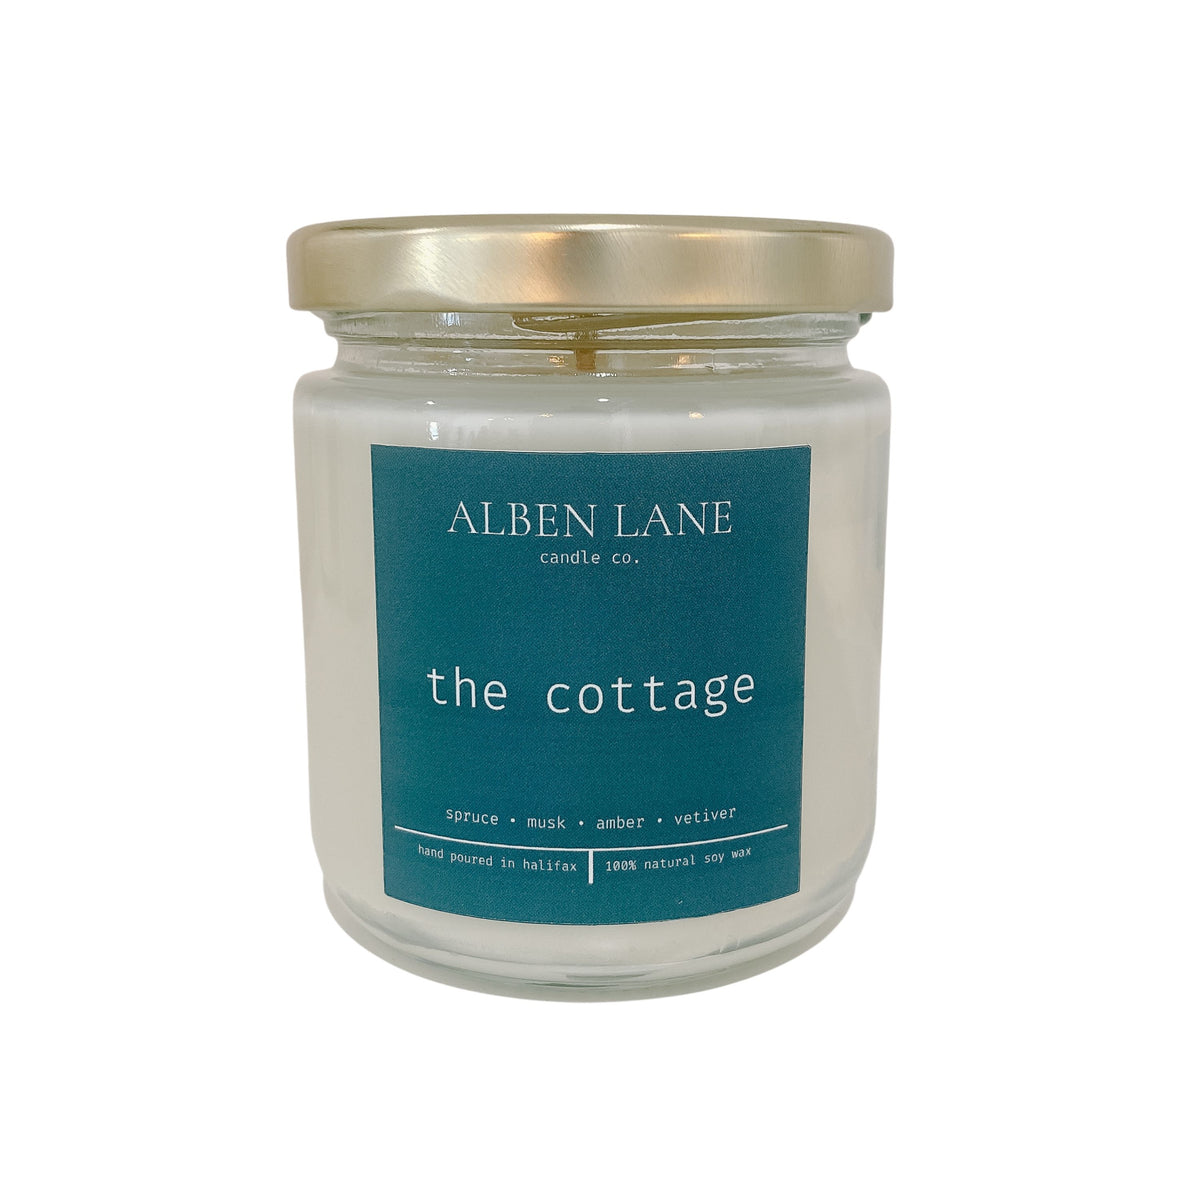 The Cottage - Alben Lane Candle Co.